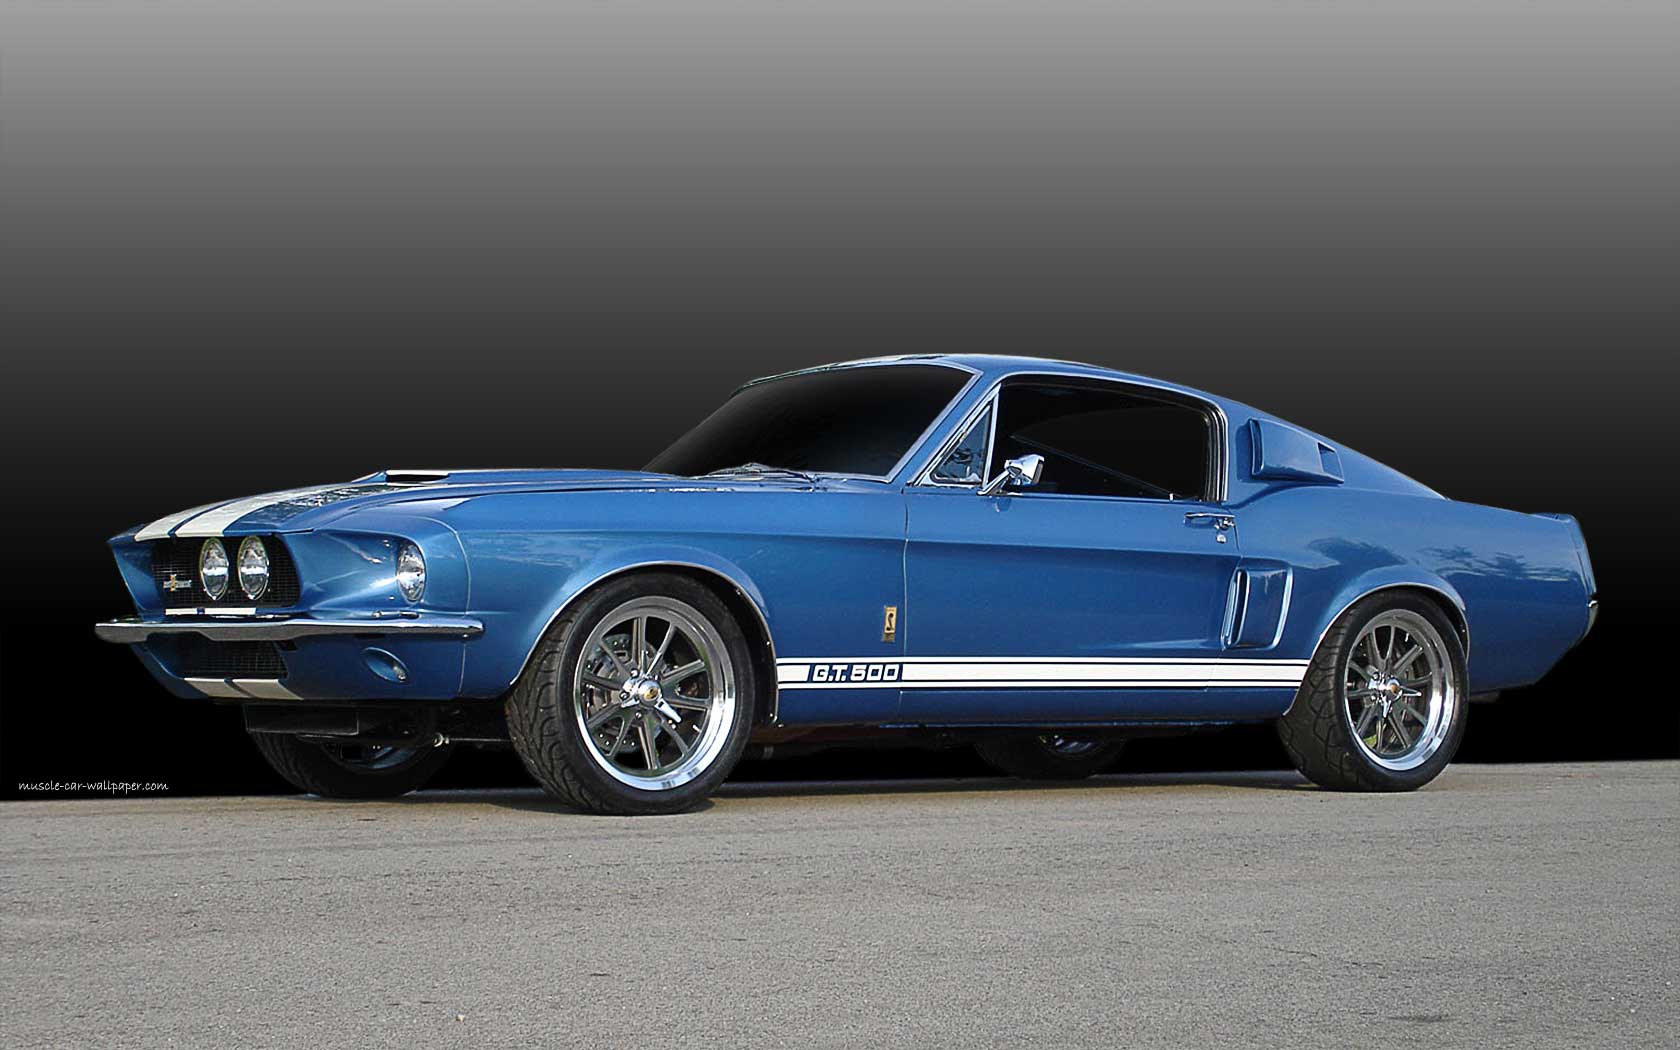 Ford Mustang Shelby Gt500 Muscle Car Wallpaper 1680